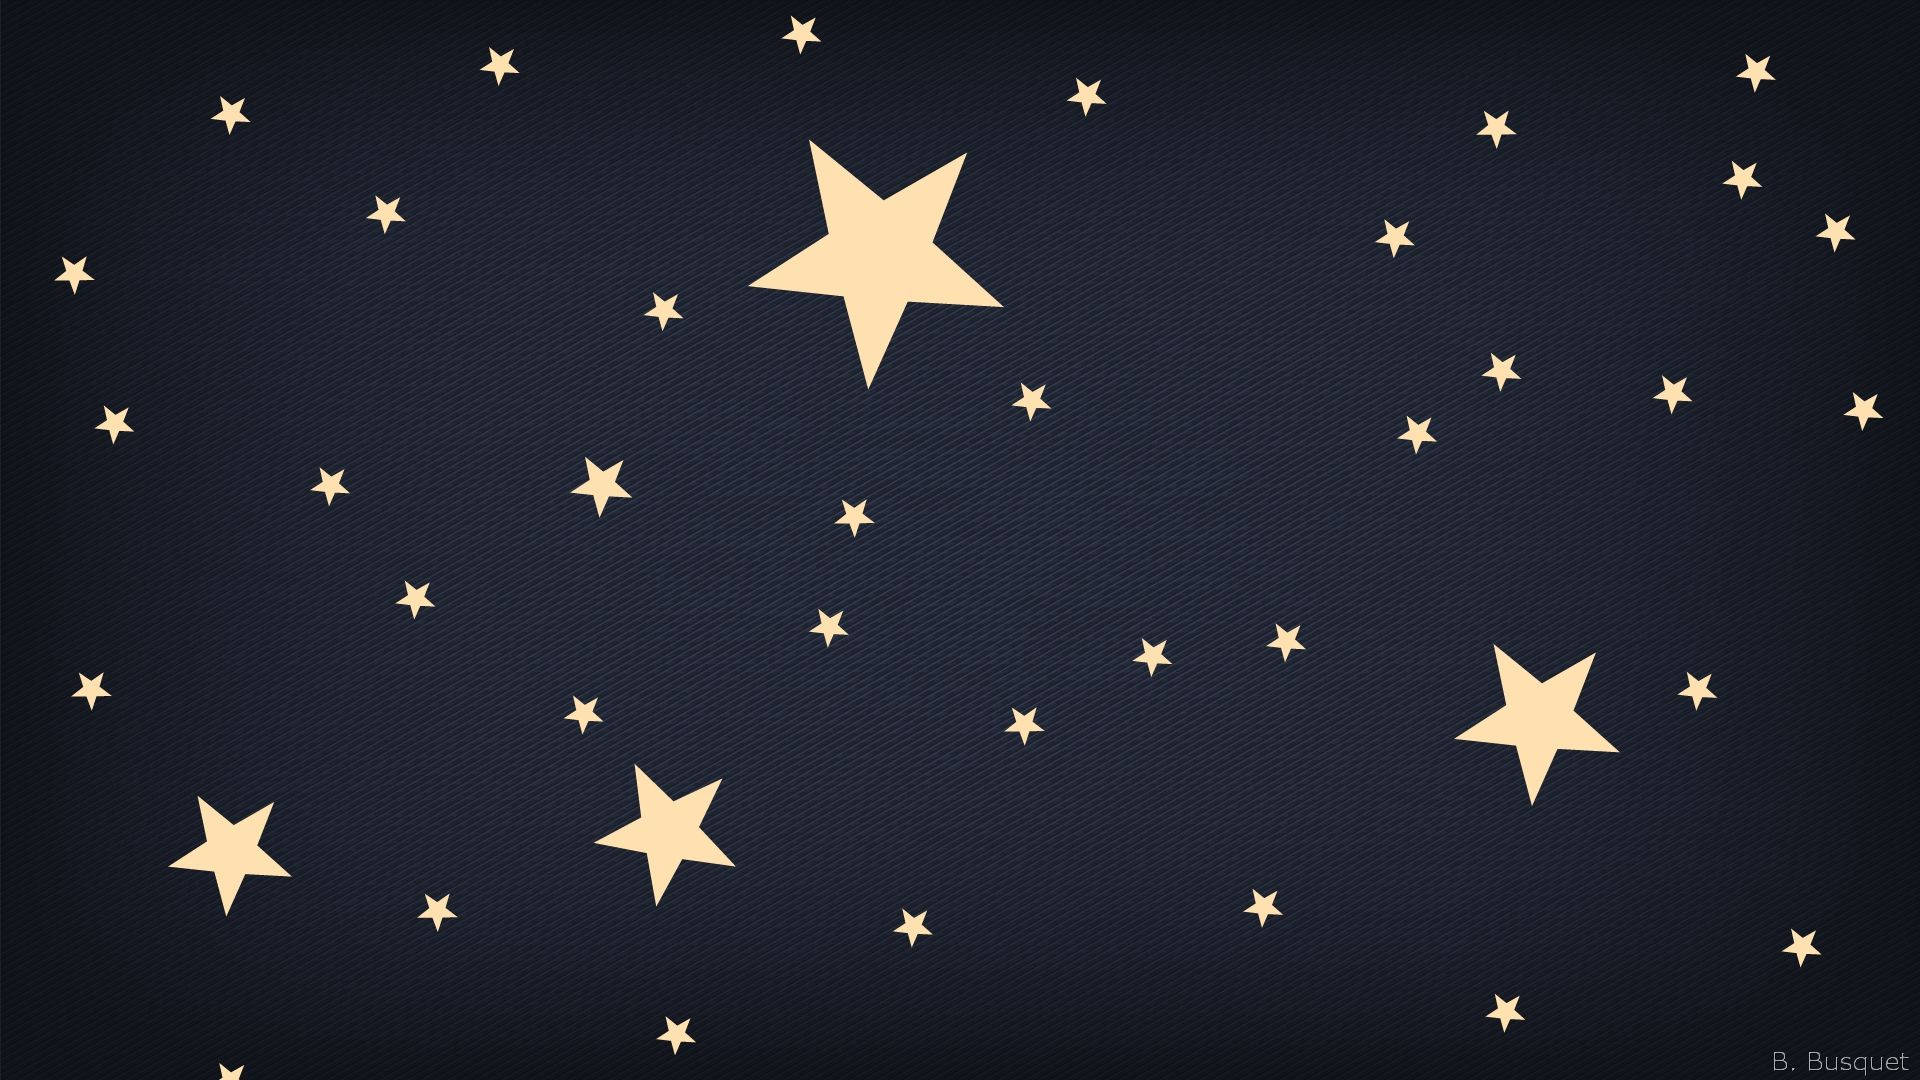 A star twinkles through the night sky Wallpaper